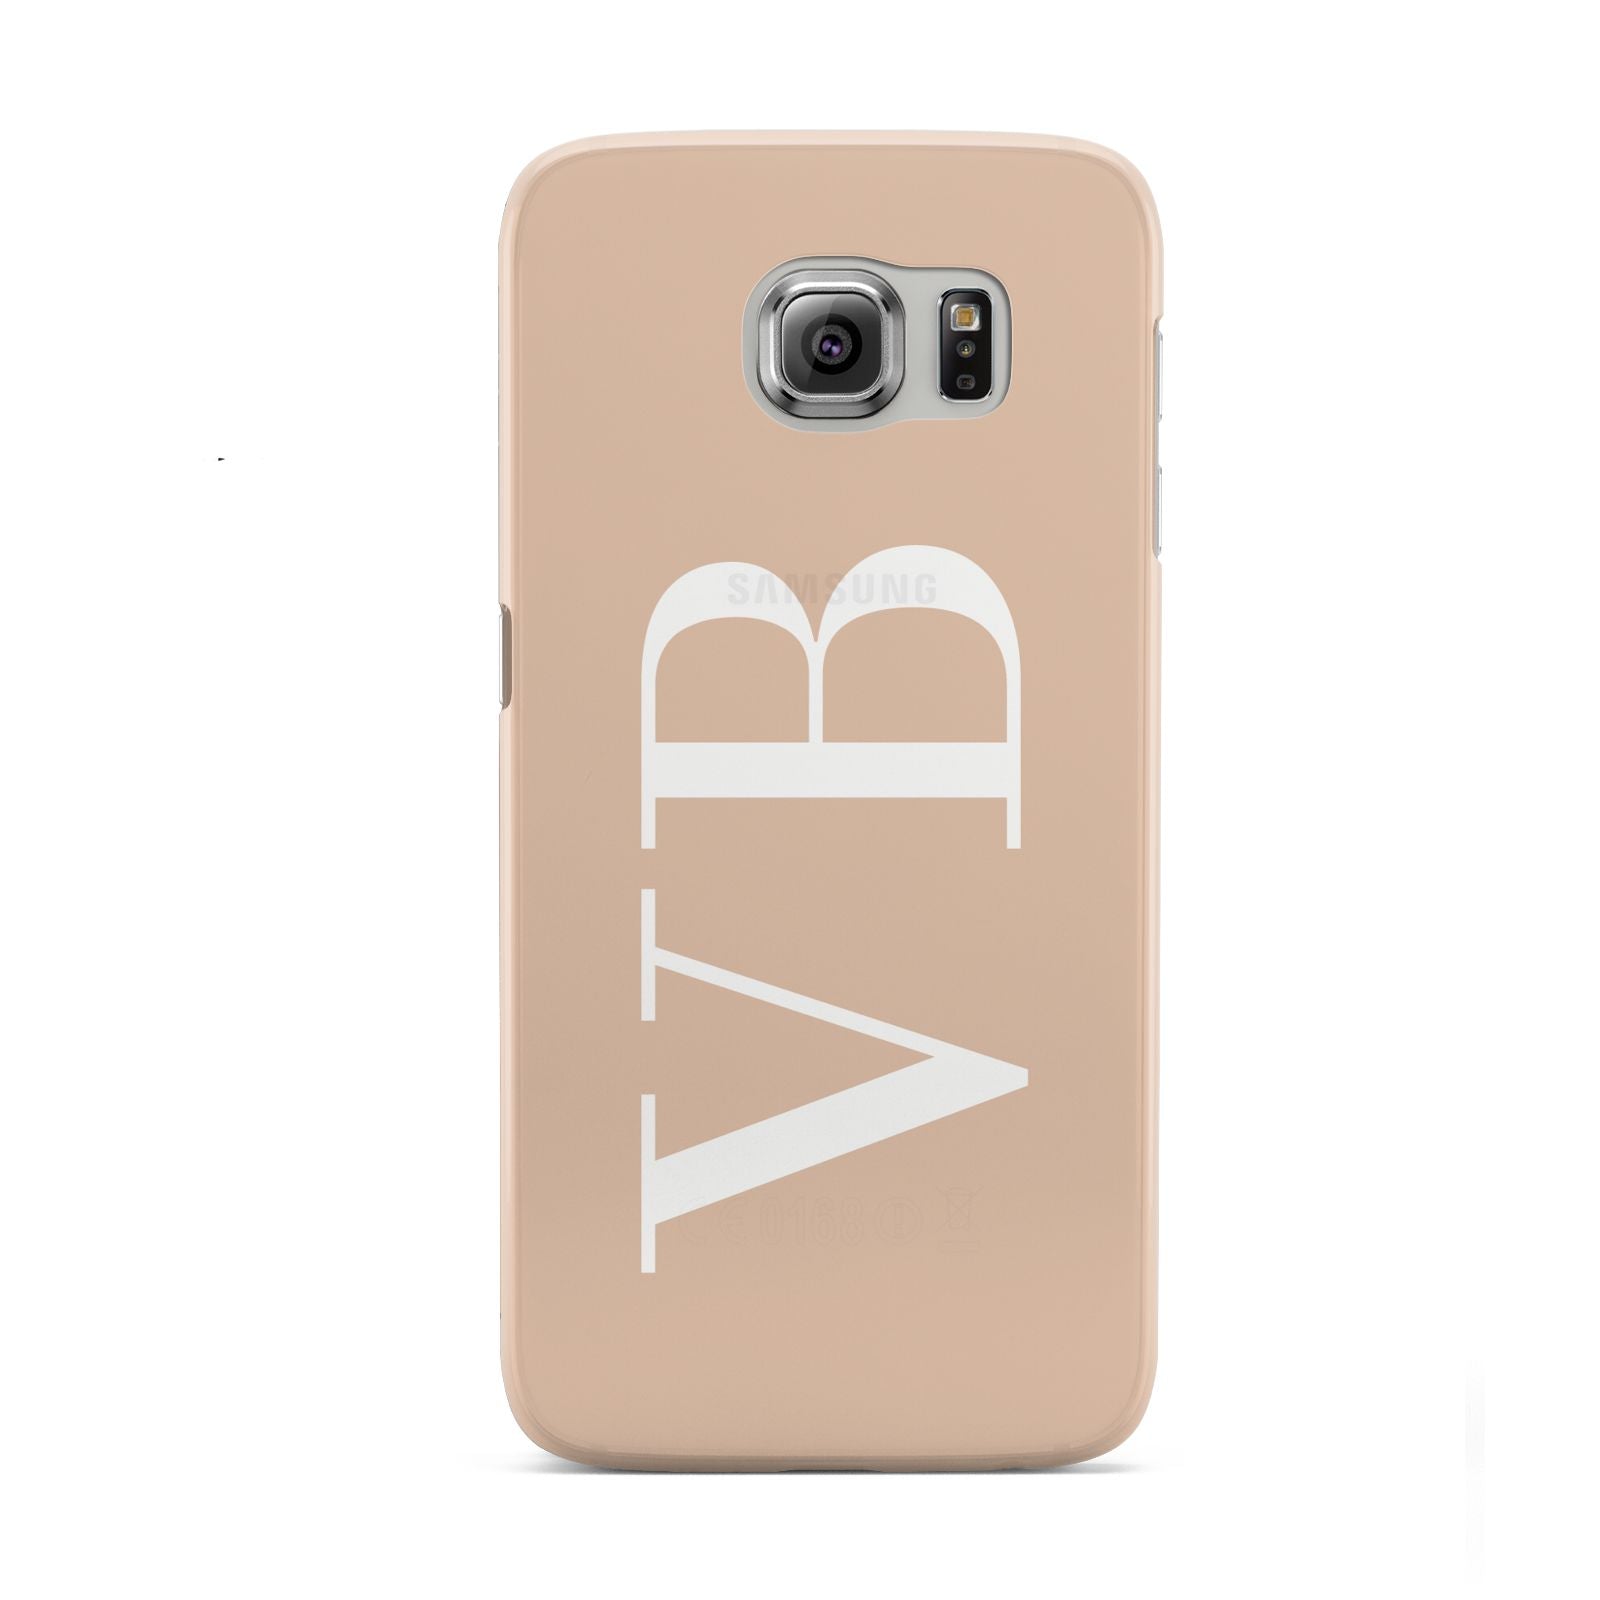 Nude And White Personalised Samsung Galaxy S6 Case